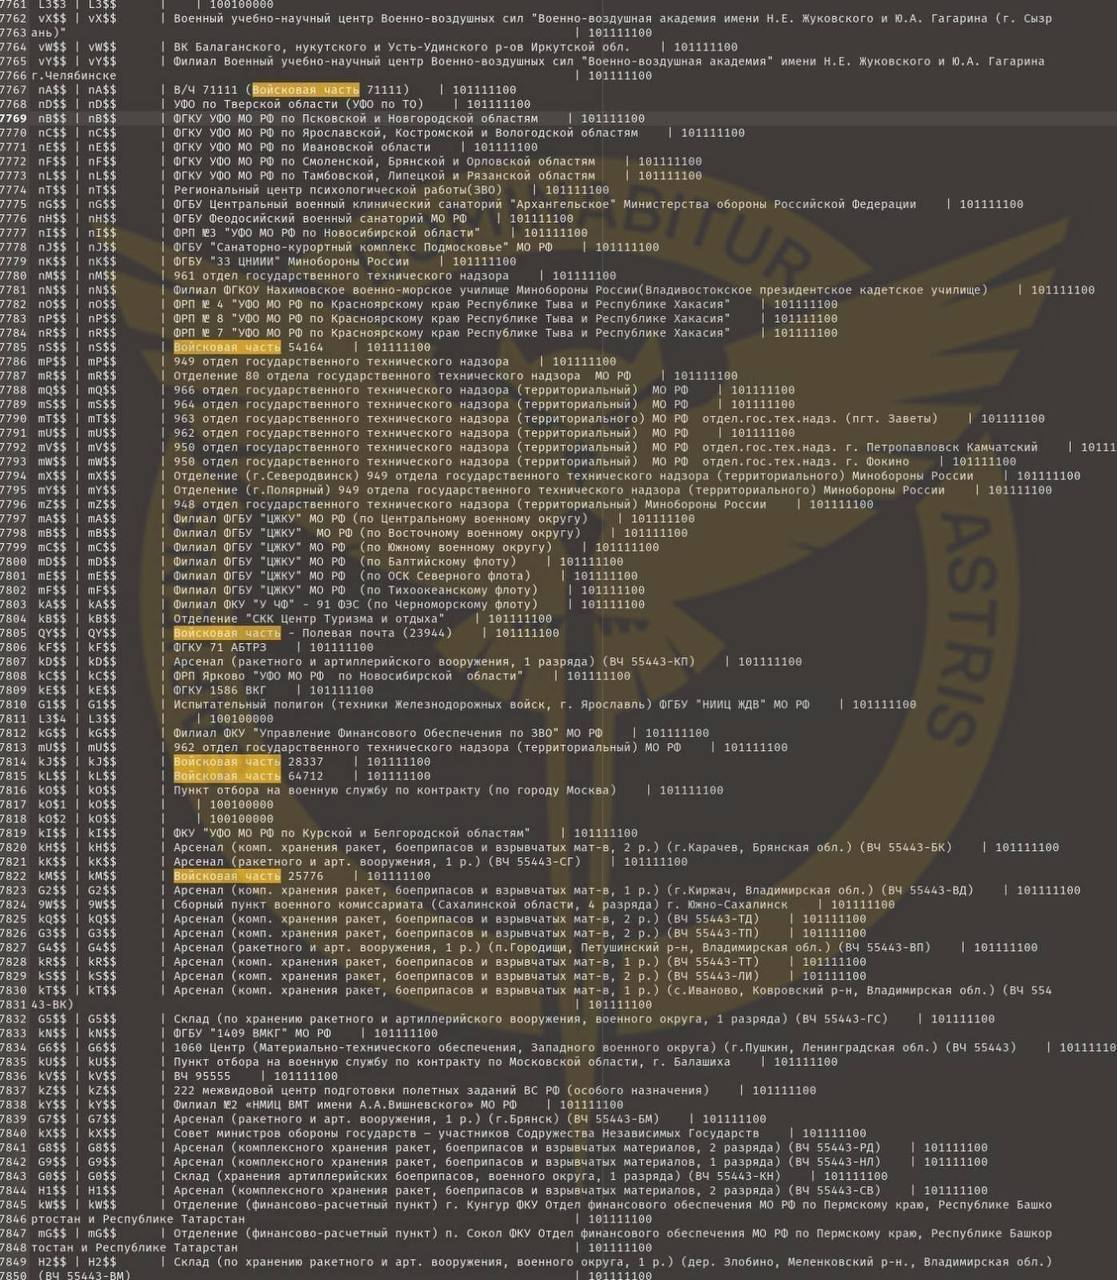 DIU cyber specialists hacked into the servers of the Russian Ministry of Defense and seized an array of classified documents